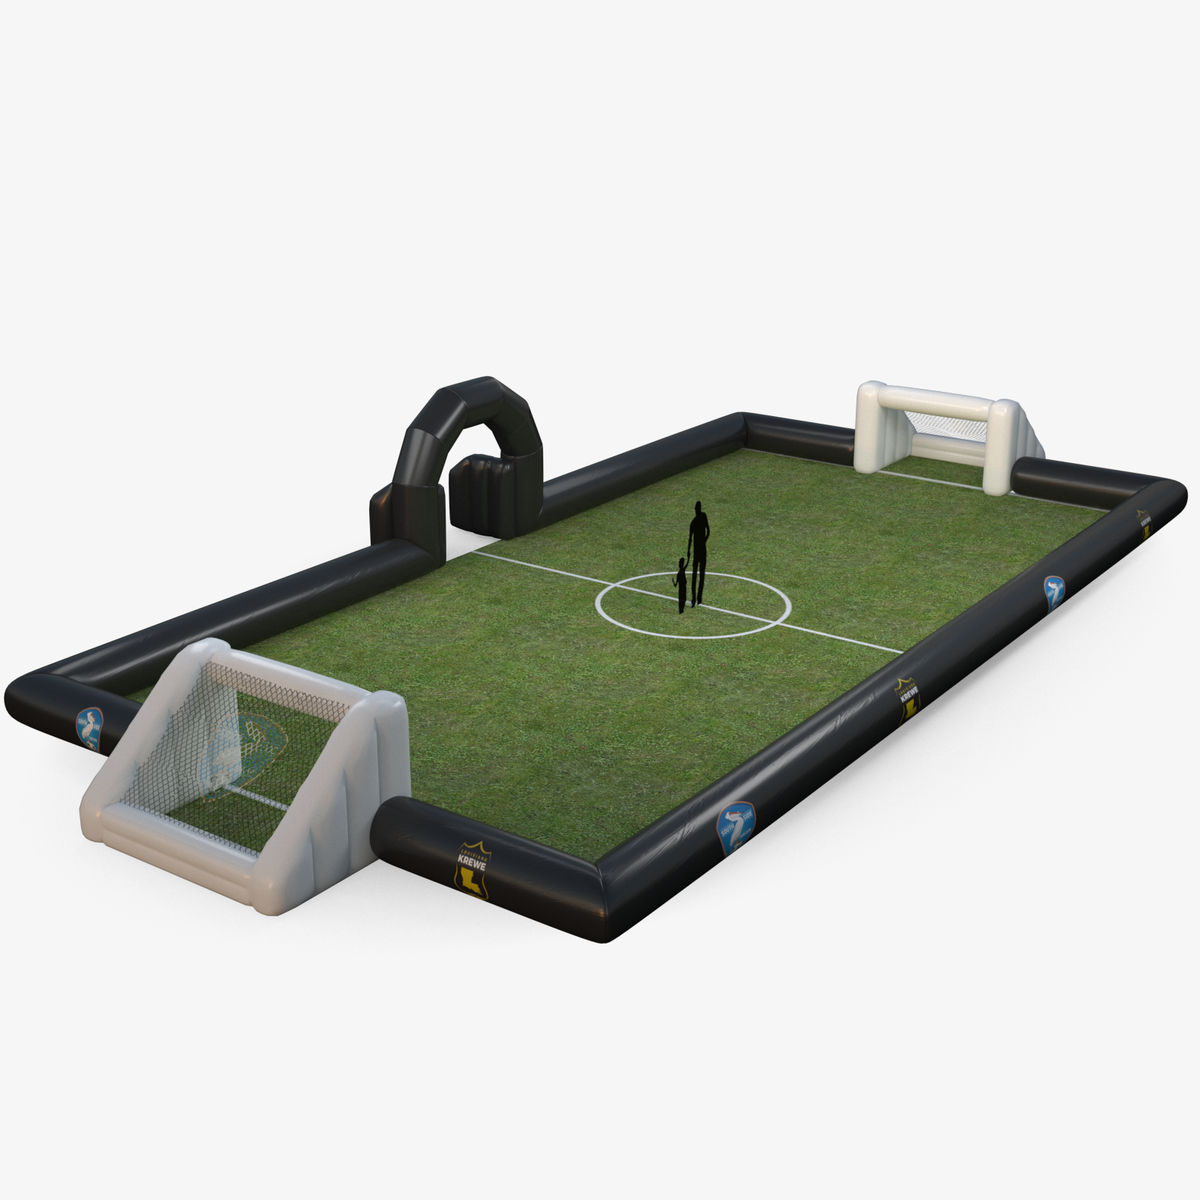 Inflatable RuggedX™ Soccer Field